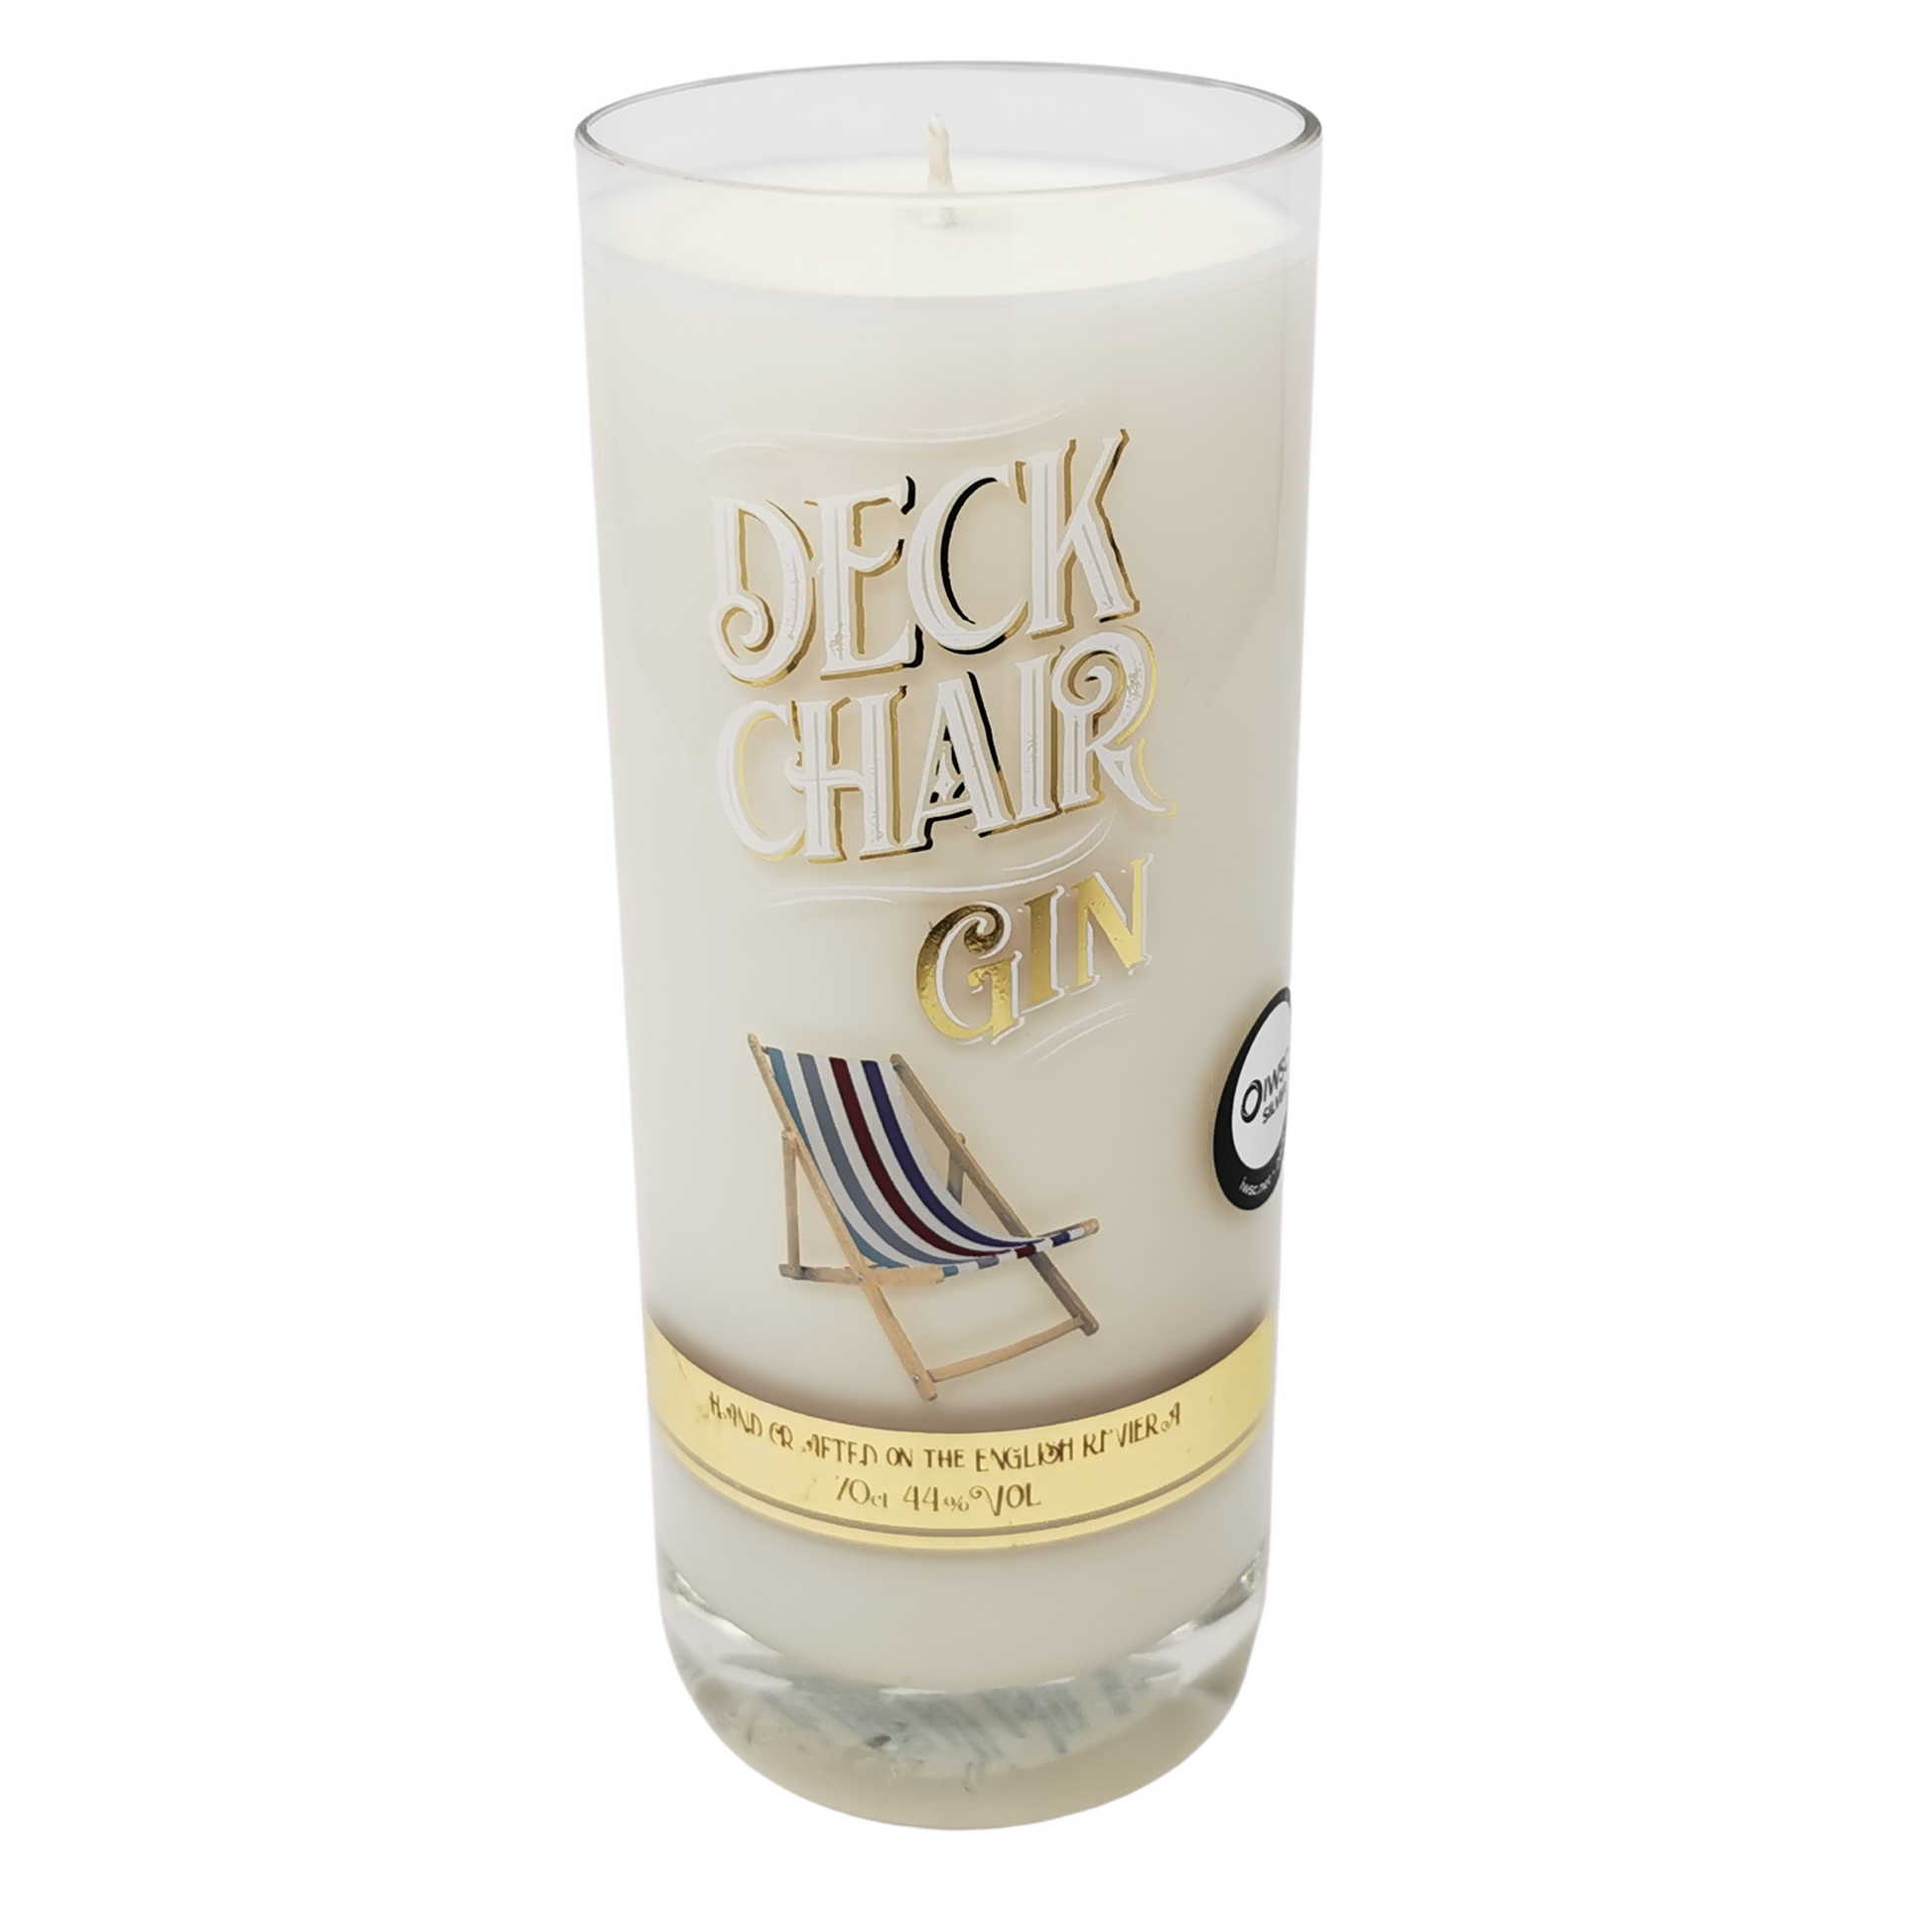 Deck Chair Gin Bottle Candle Gin Bottle Candles Adhock Homeware